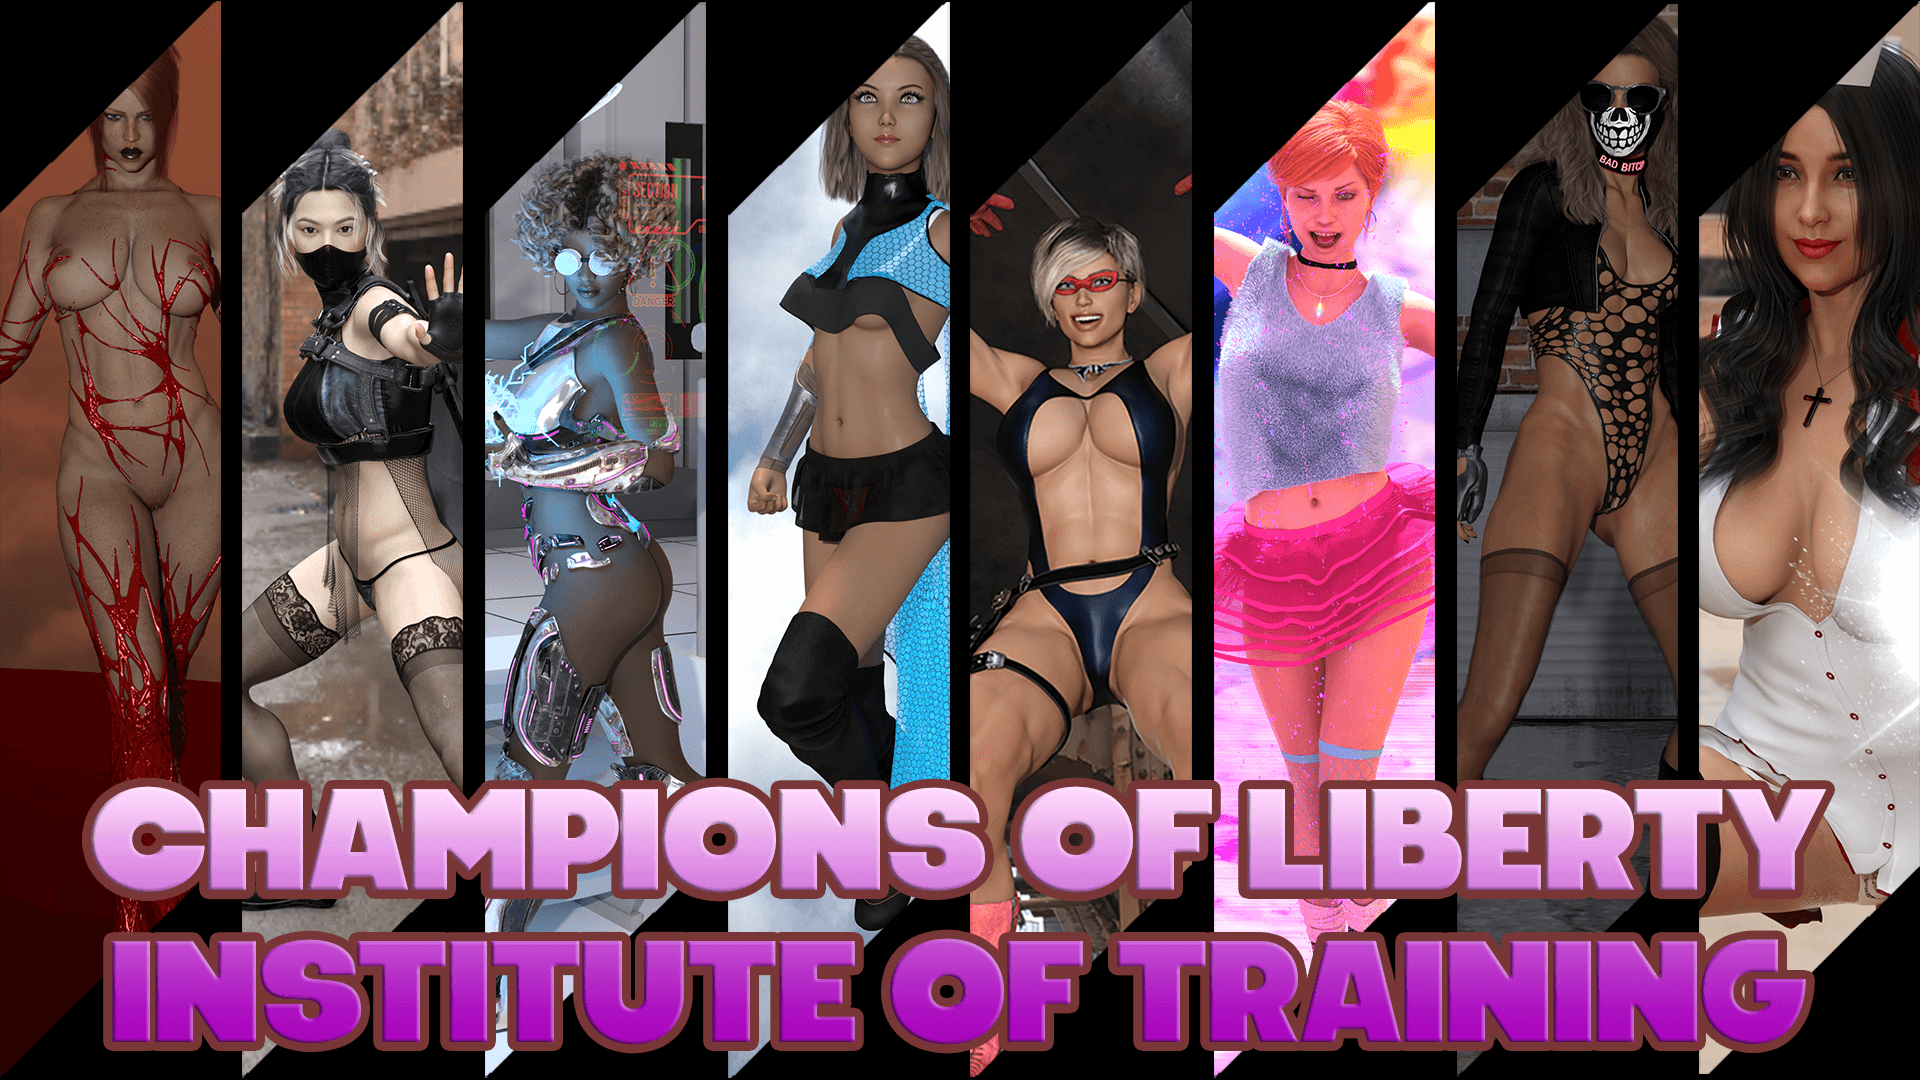 Champions of Liberty Institute of Training [v0.7]